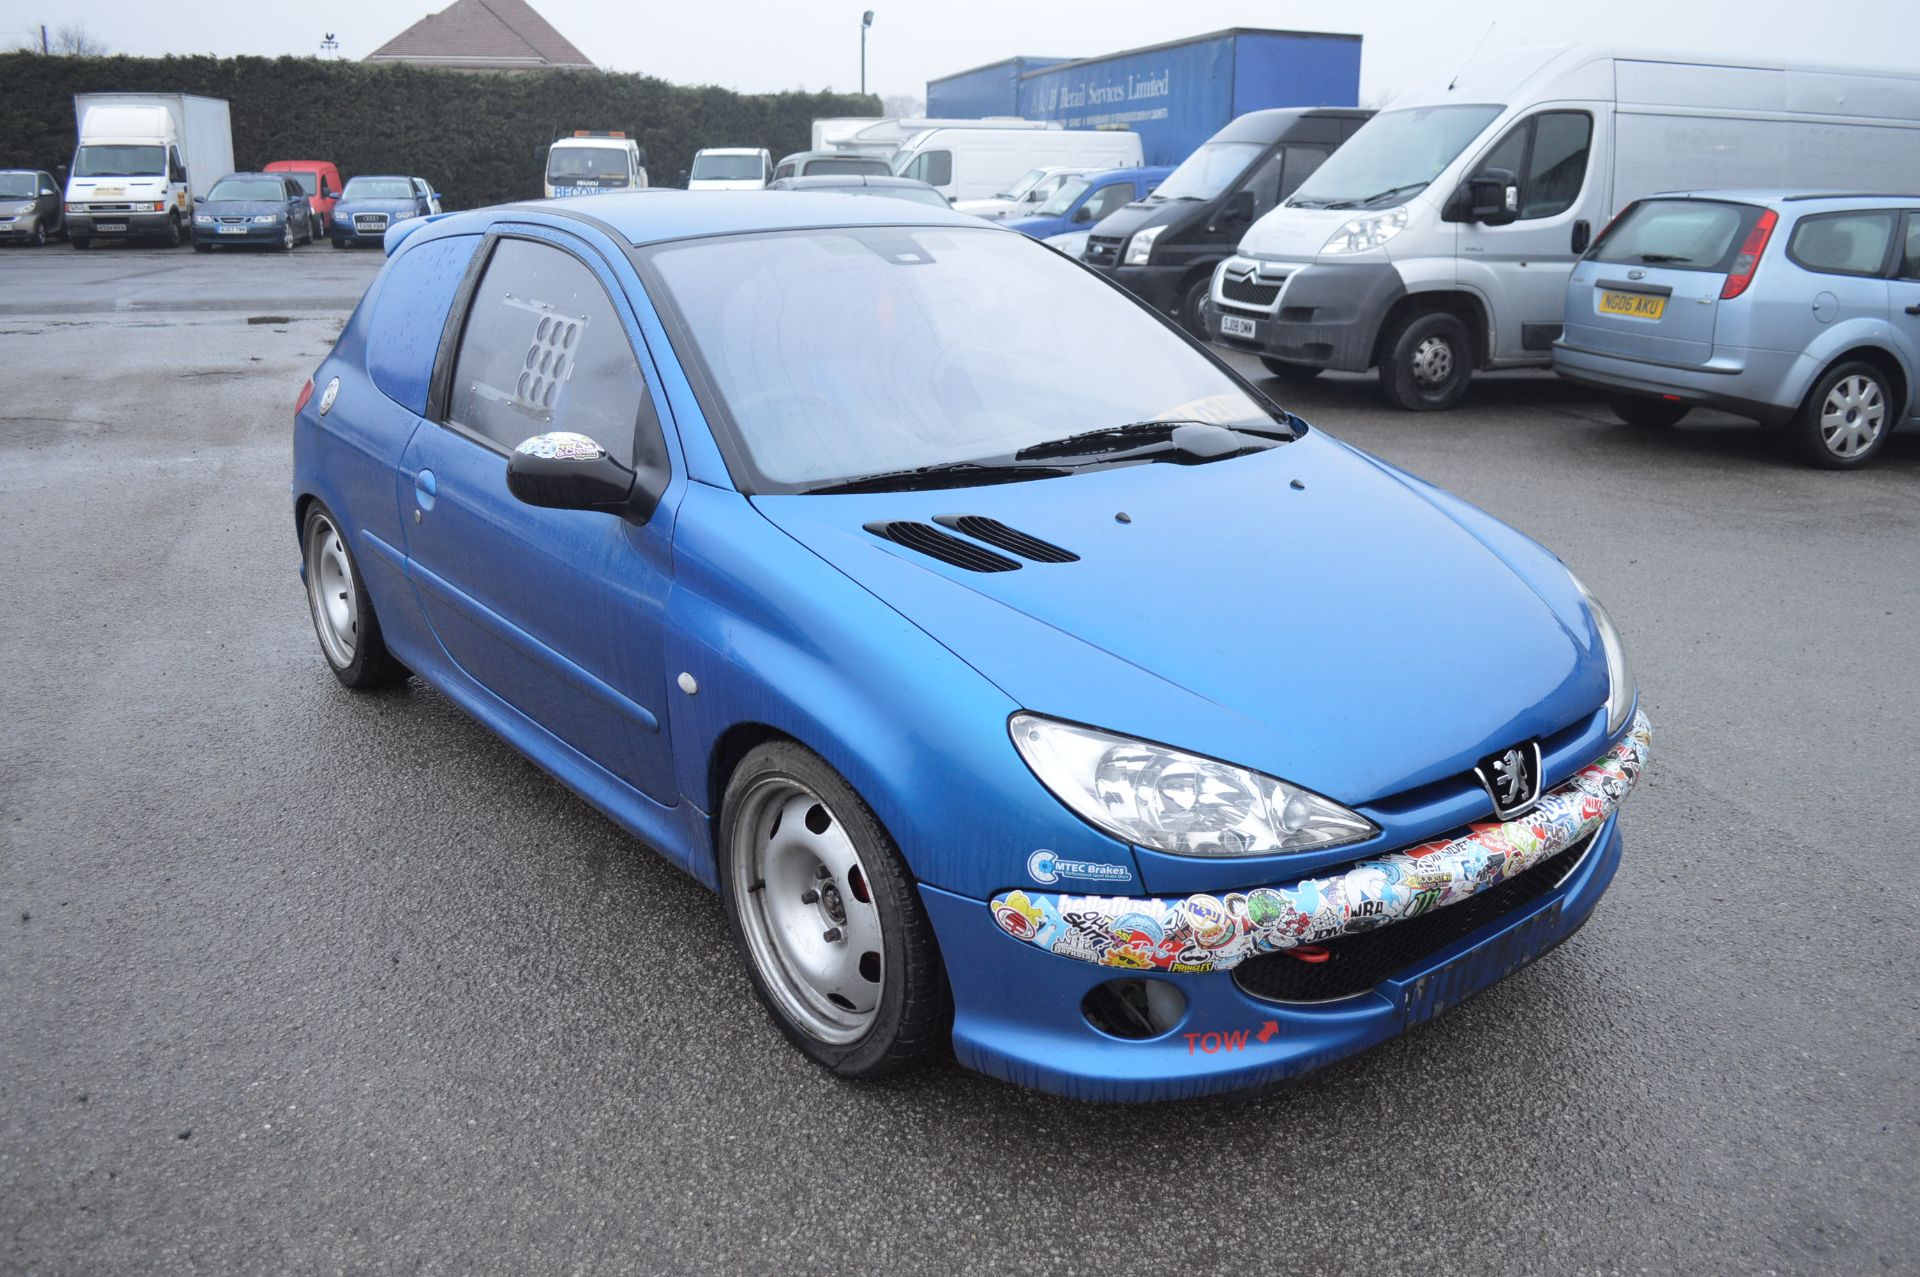 2003/03 REG PEUGEOT 206 GTI 180HP FAST TRACK DAY CAR  HAS THE 'VAN' PANELS FITTED INSTEAD OF REAR